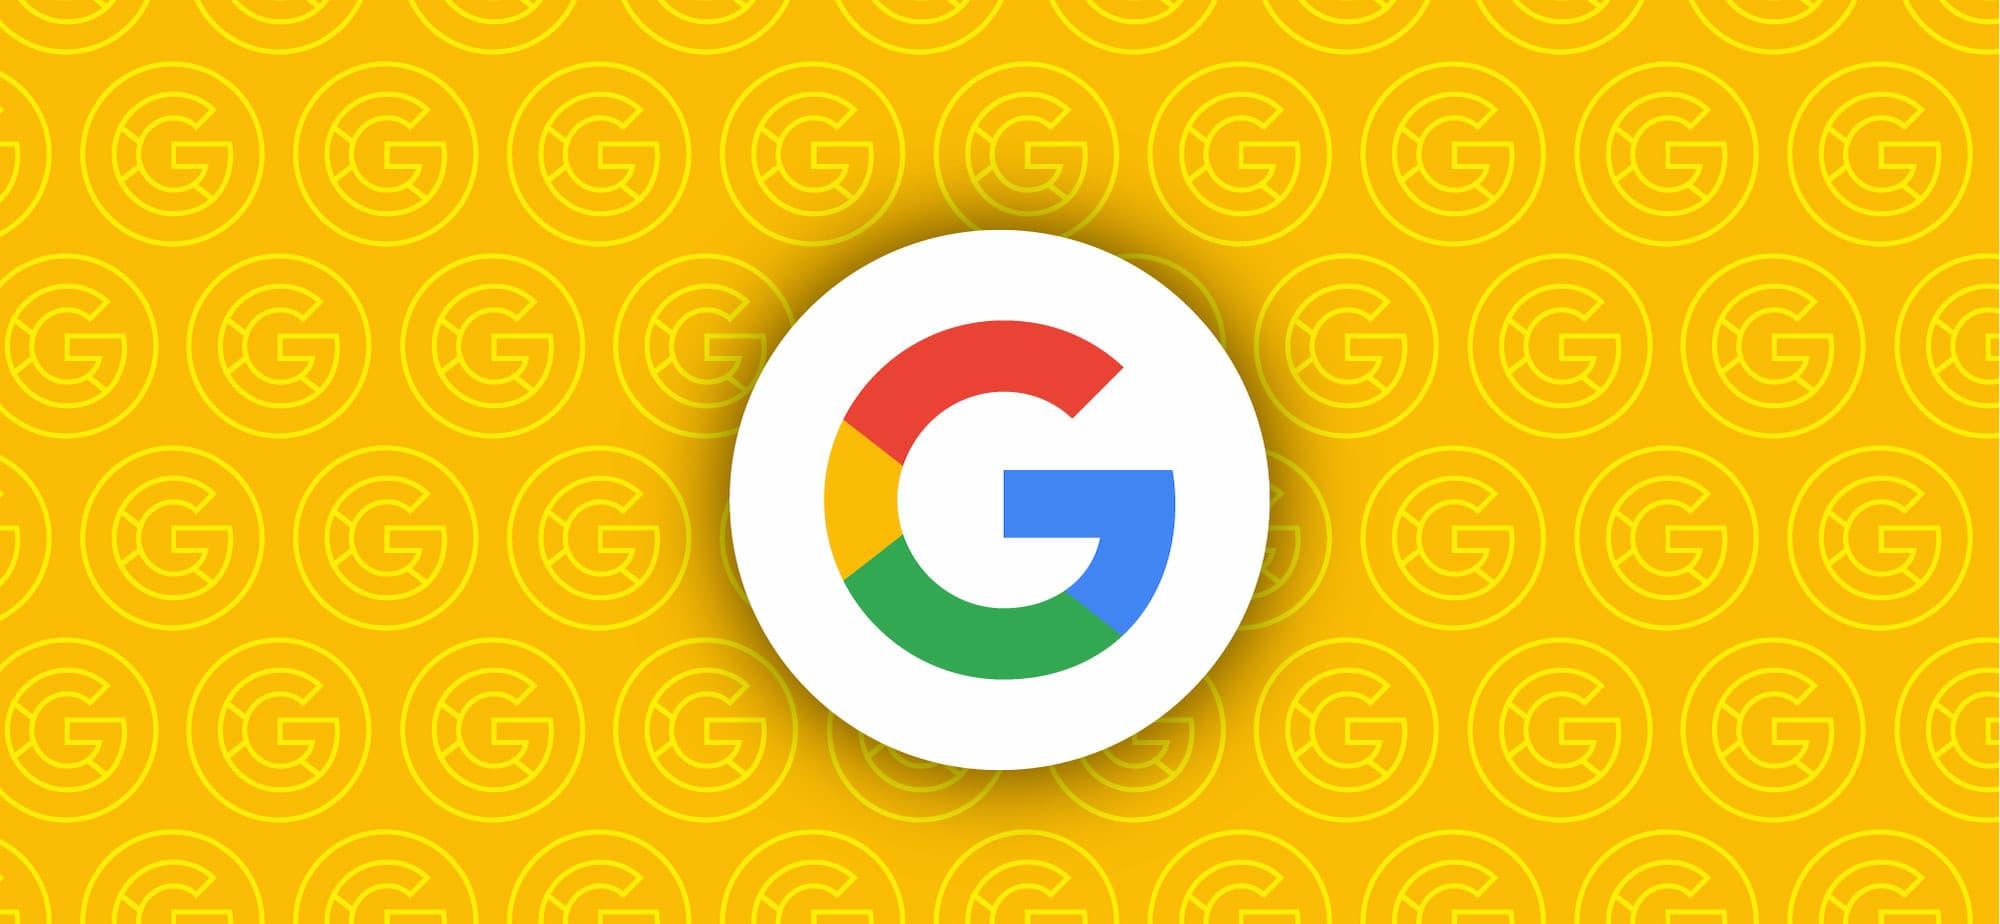 Google Search Introduces Notifications Feed for Mobile Users